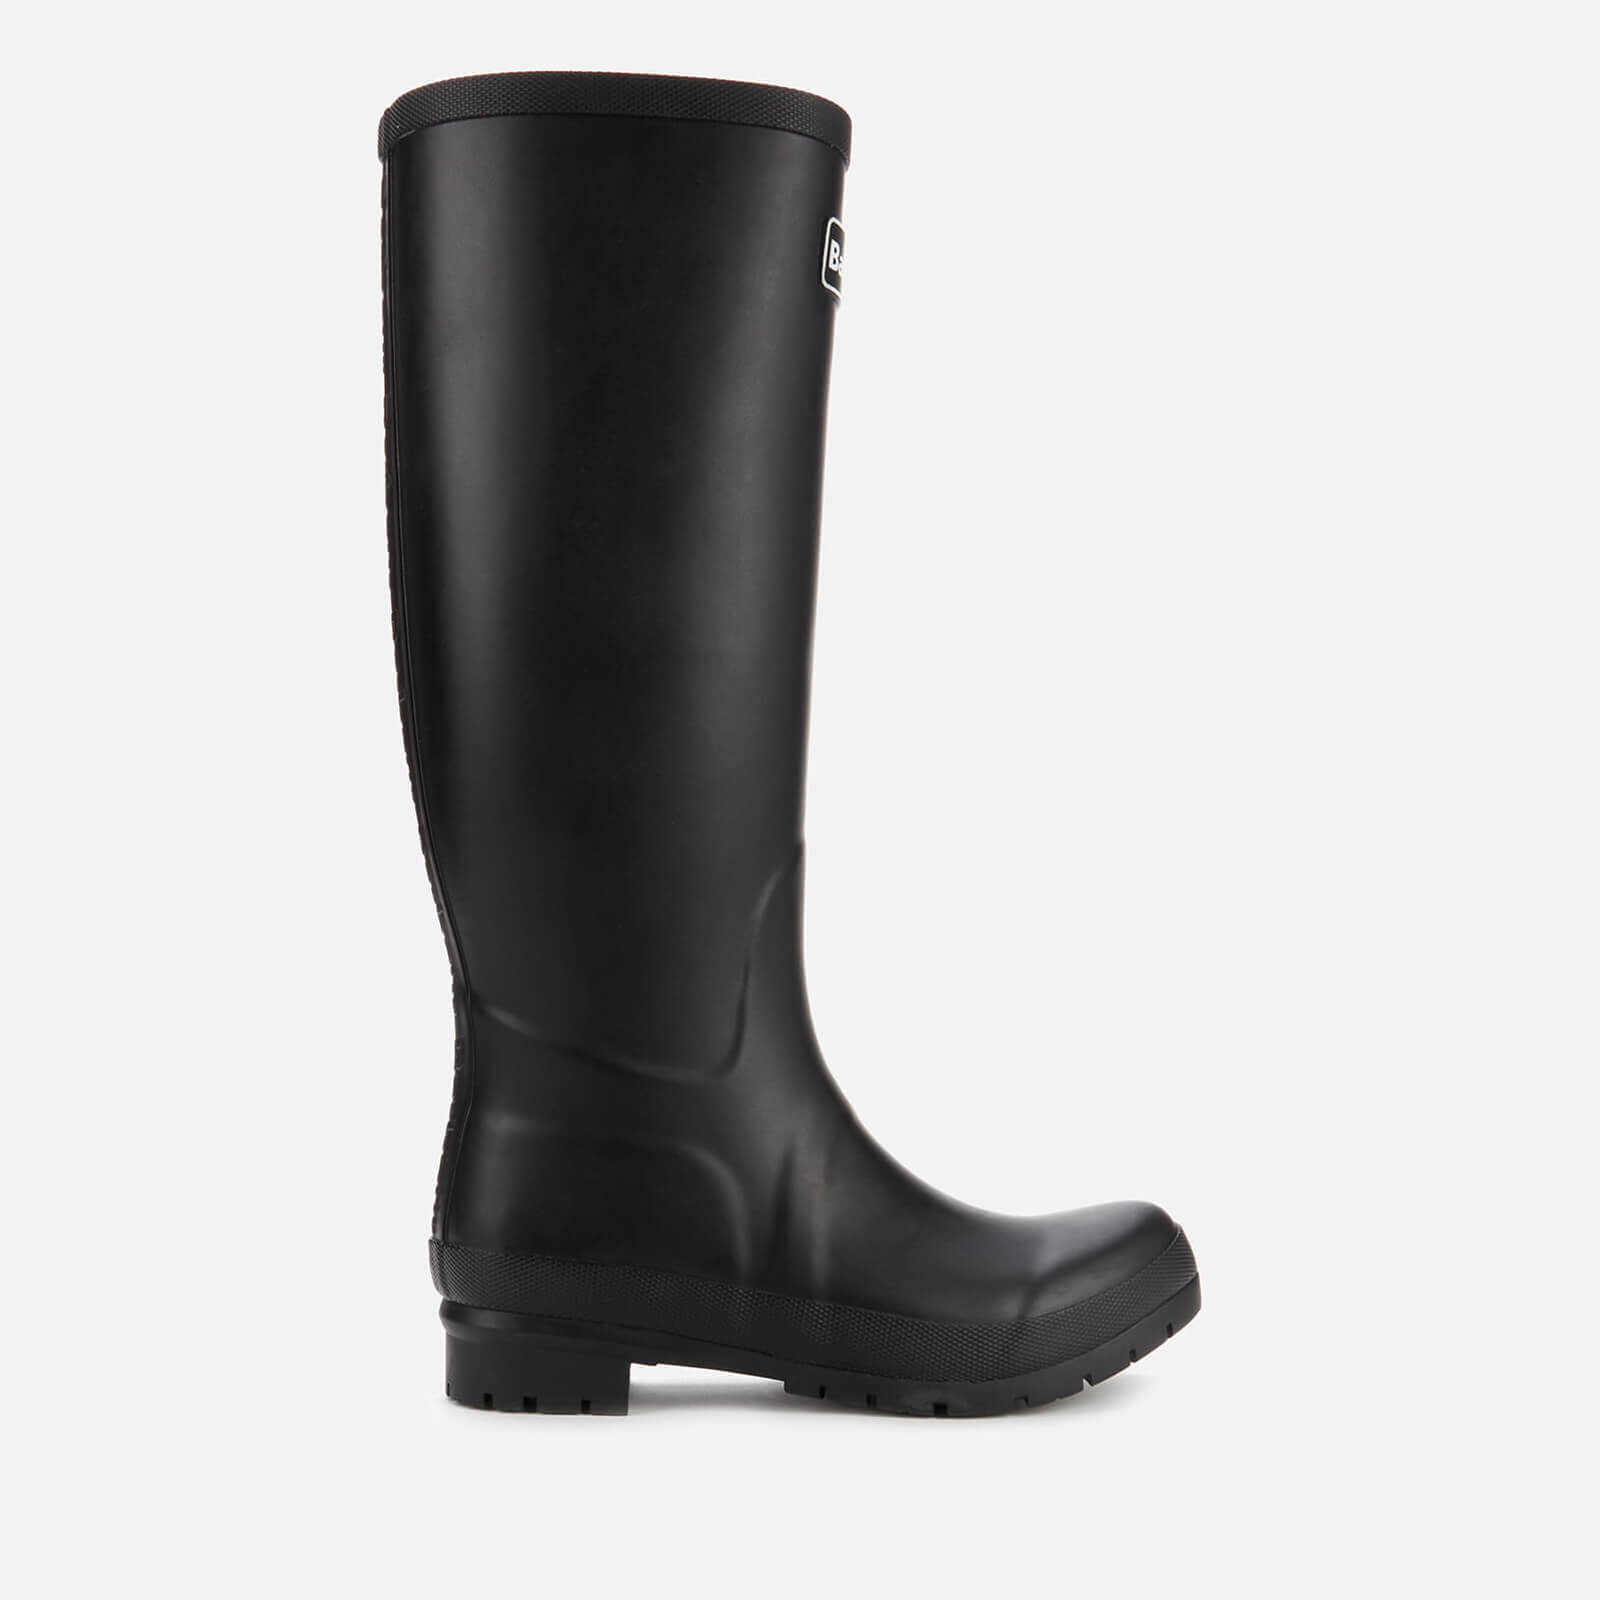 Barbour Women’s Abbey Tall Wellies - Black